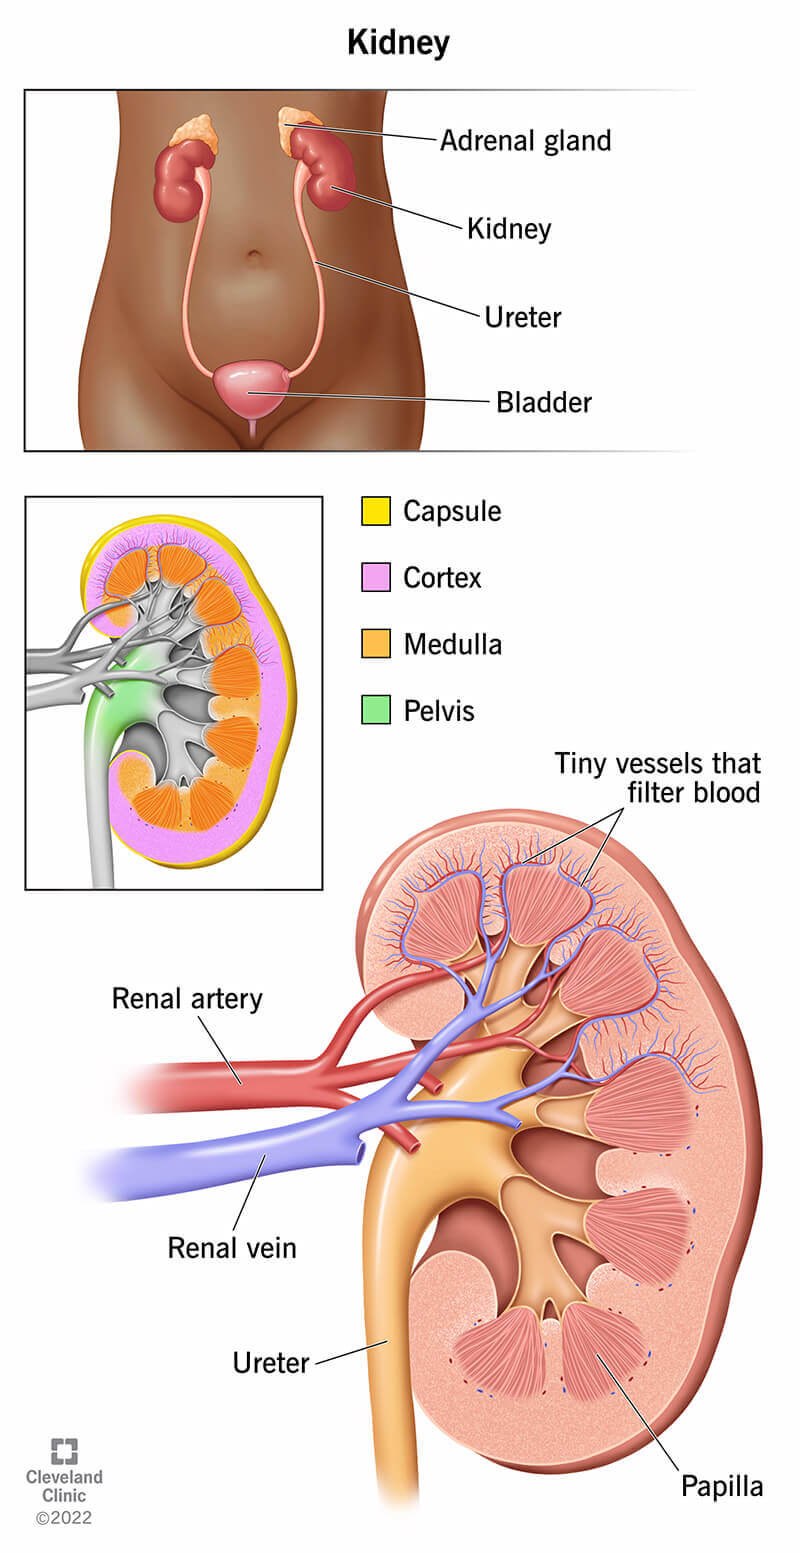 Kidney anatomy, including their location in the body and details of the parts that make up your kidneys.